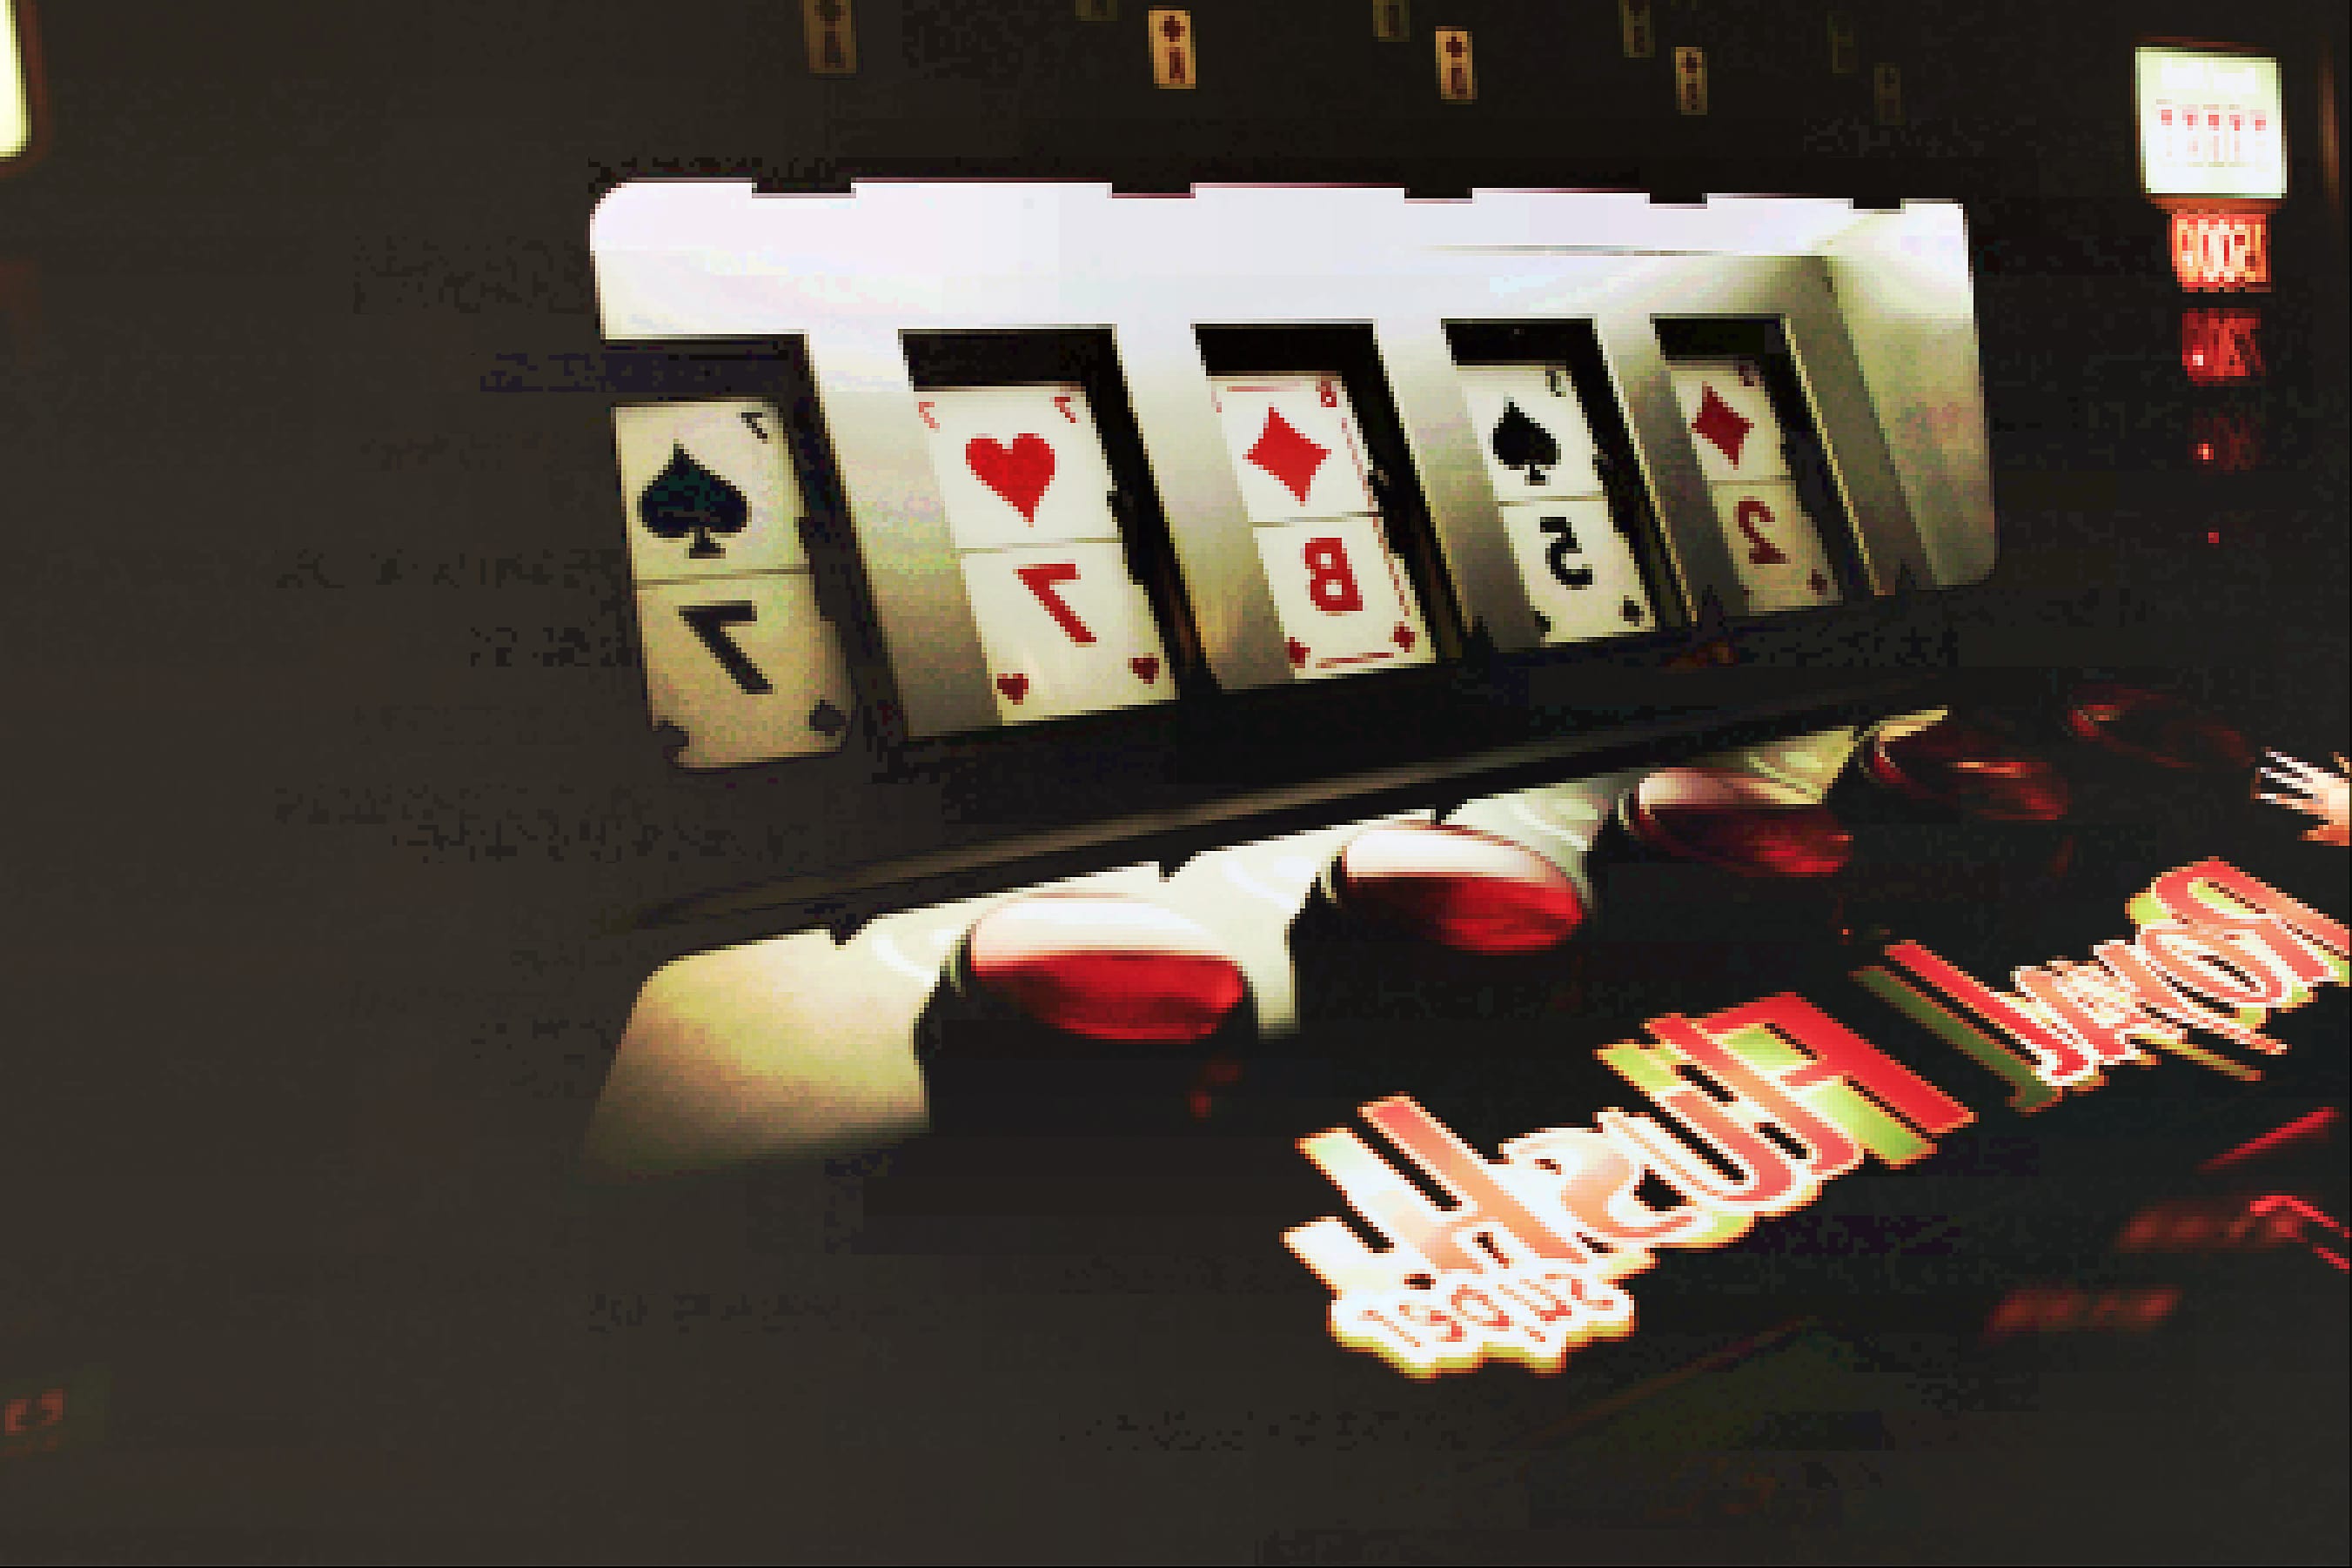 How Much Money Does the Average Gambler Lose? average loss